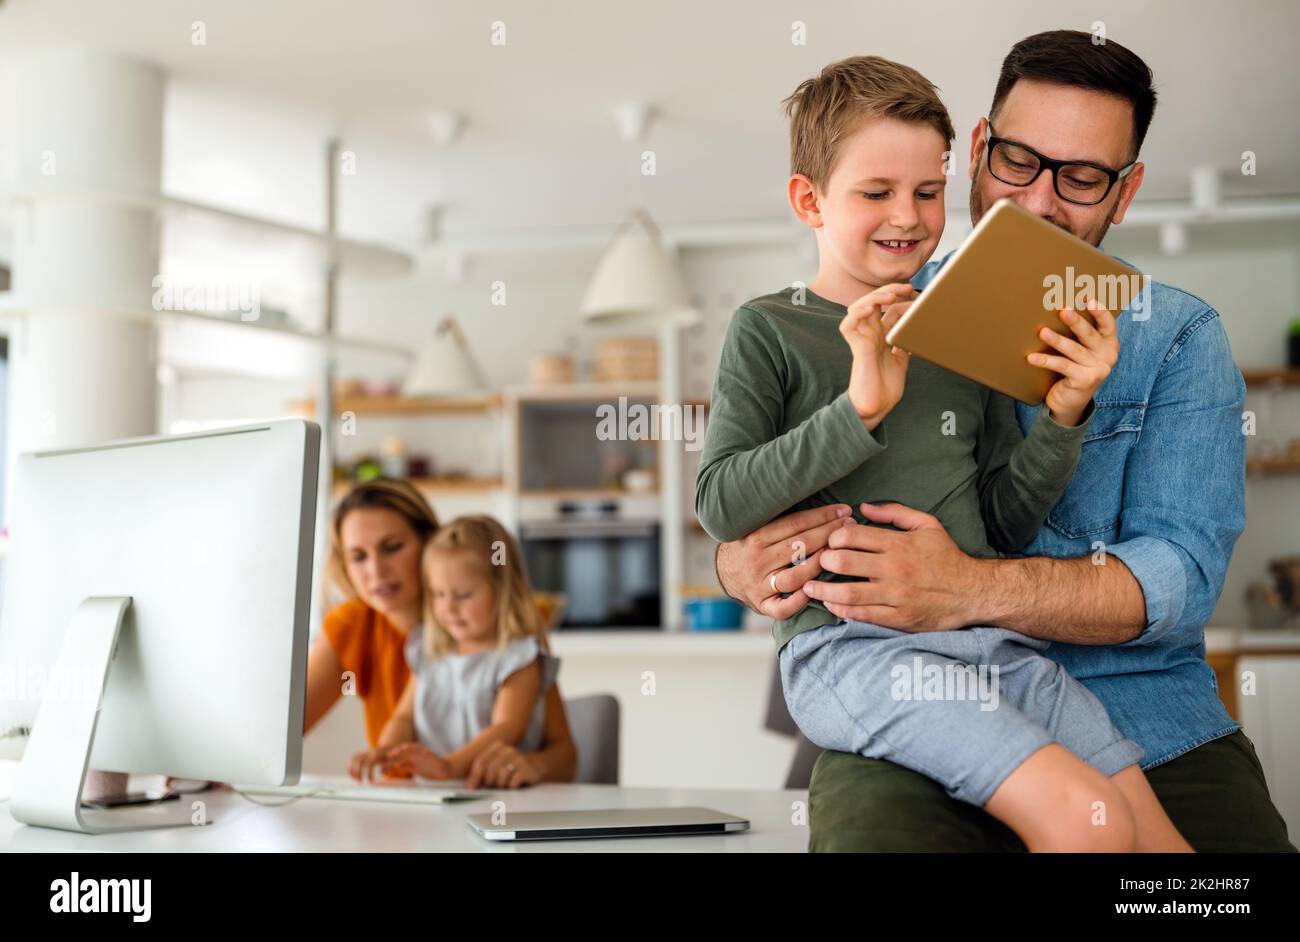 Device technology family online education concept. Happy family with digital devices at home. Stock Photo